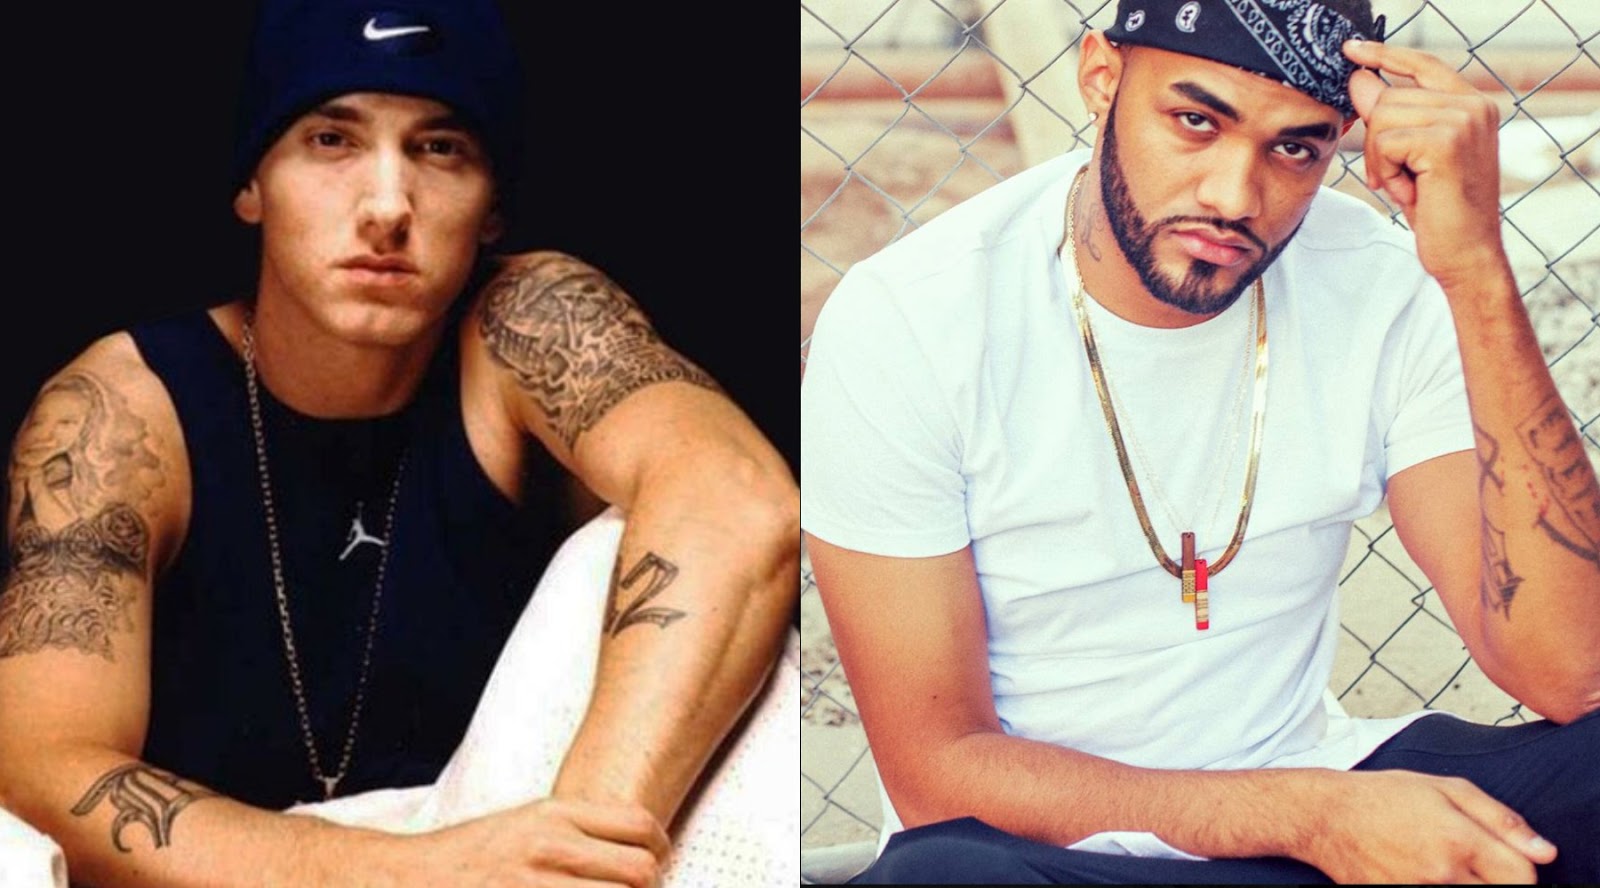 Joyner Lucas Joins Eminem Nick Cannon Diss, Warn Nick to Stop Else Kendrick and J. Cole Will ?